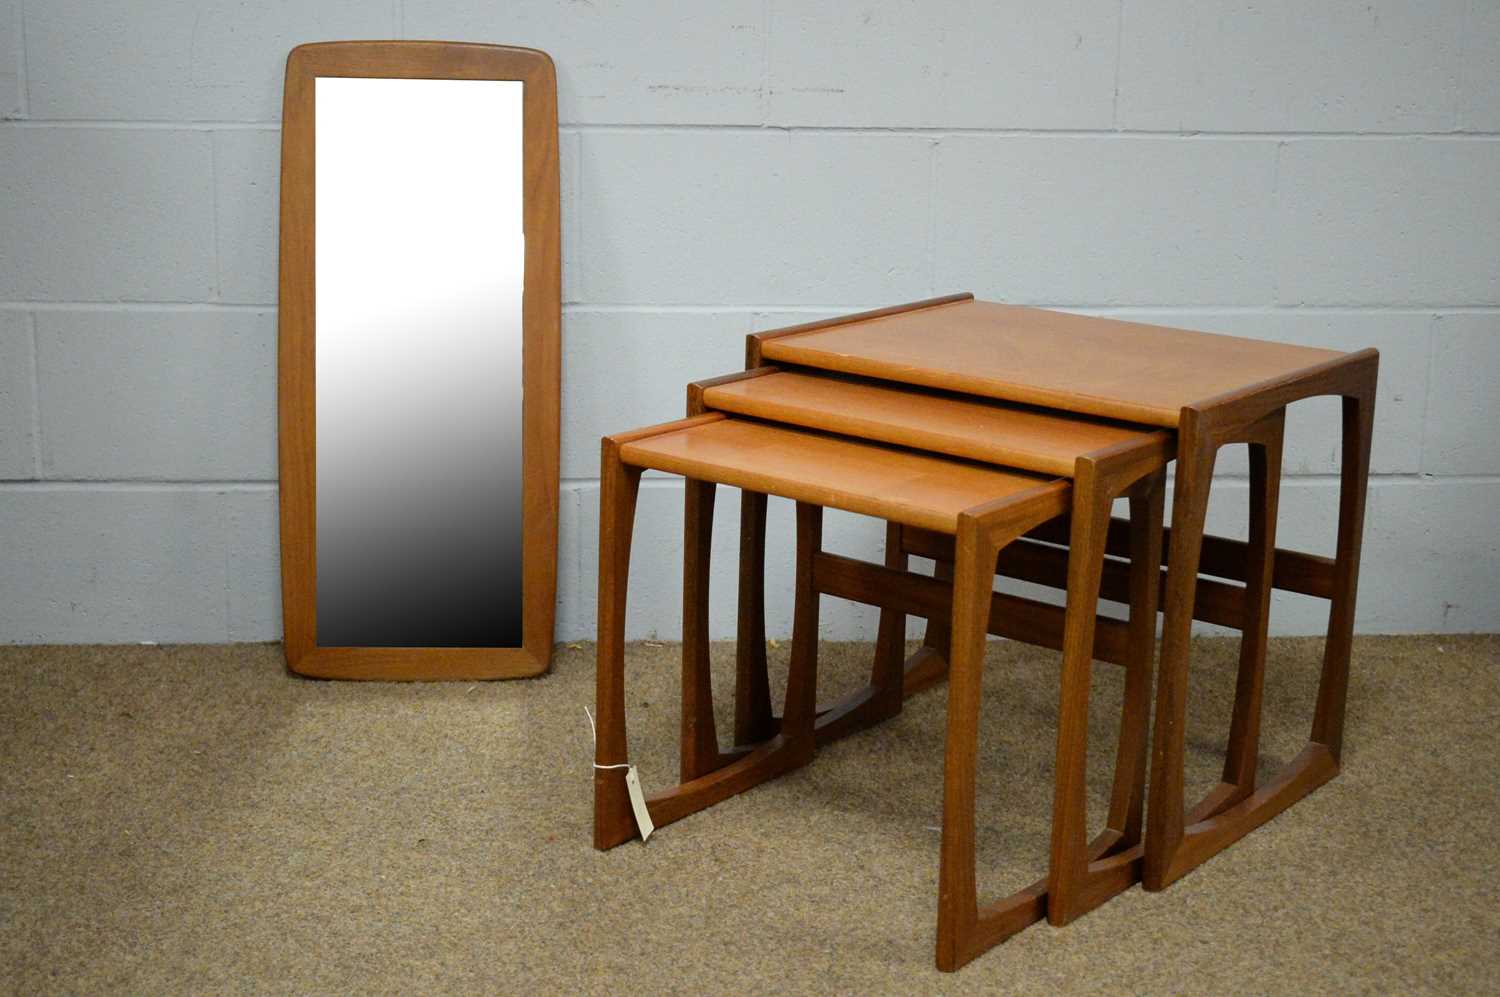 A G-Plan 'quadrille' nest of tables; and a wall mirror